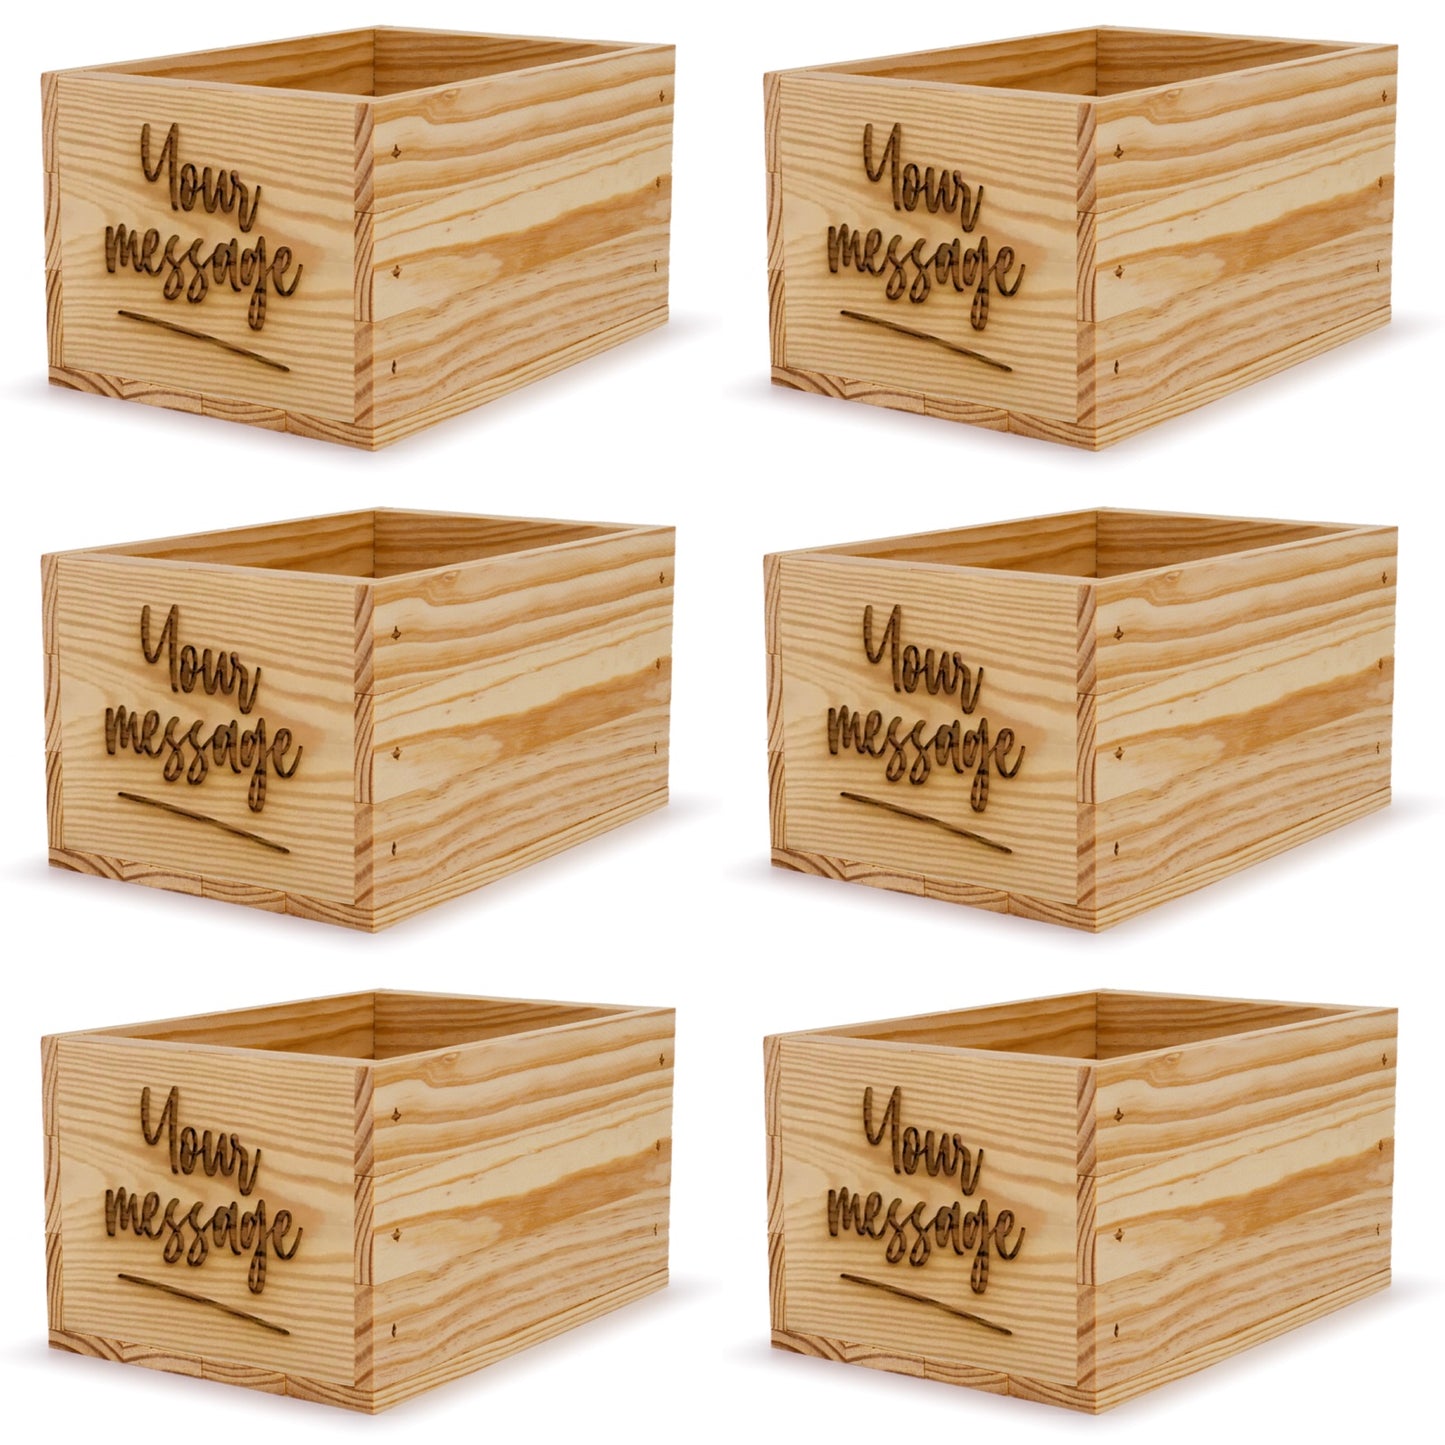 6 Small wooden crates with custom message 9x6.25x5.25